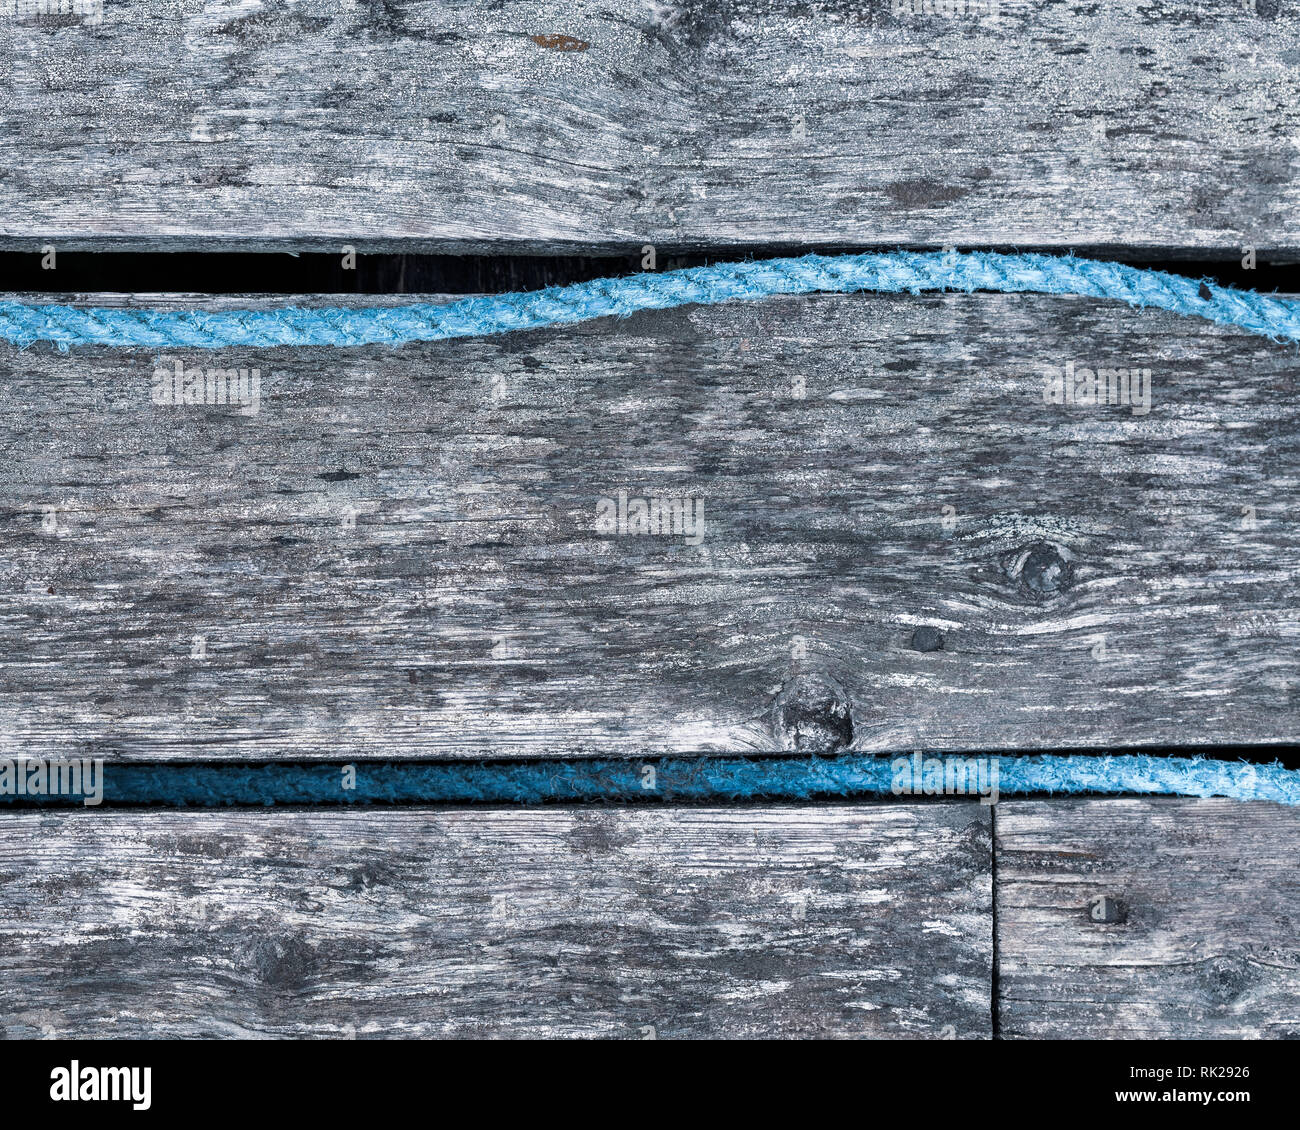 Weathered horizontal wooden panelling with blue rope, full frame, close up Stock Photo